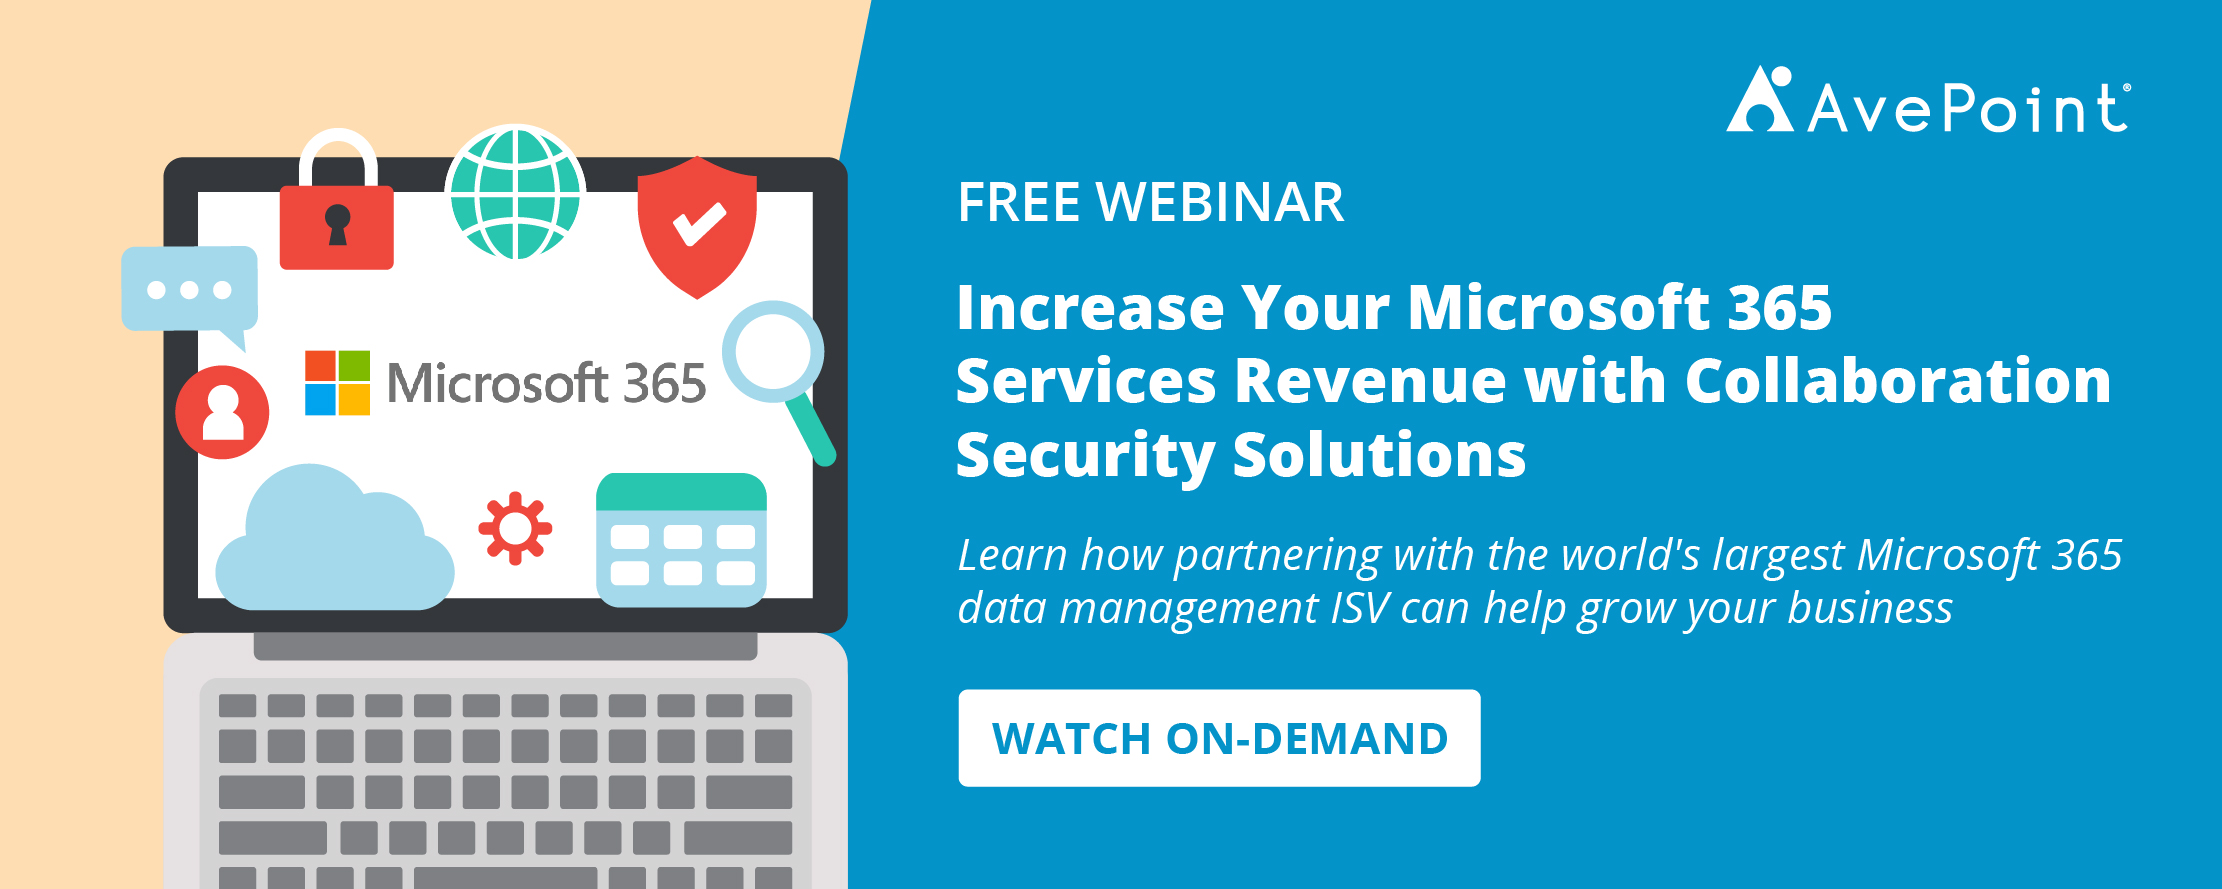 Increase-Your-Microsoft-365-Services-Revenue-with-Collaboration-Security-Solutions